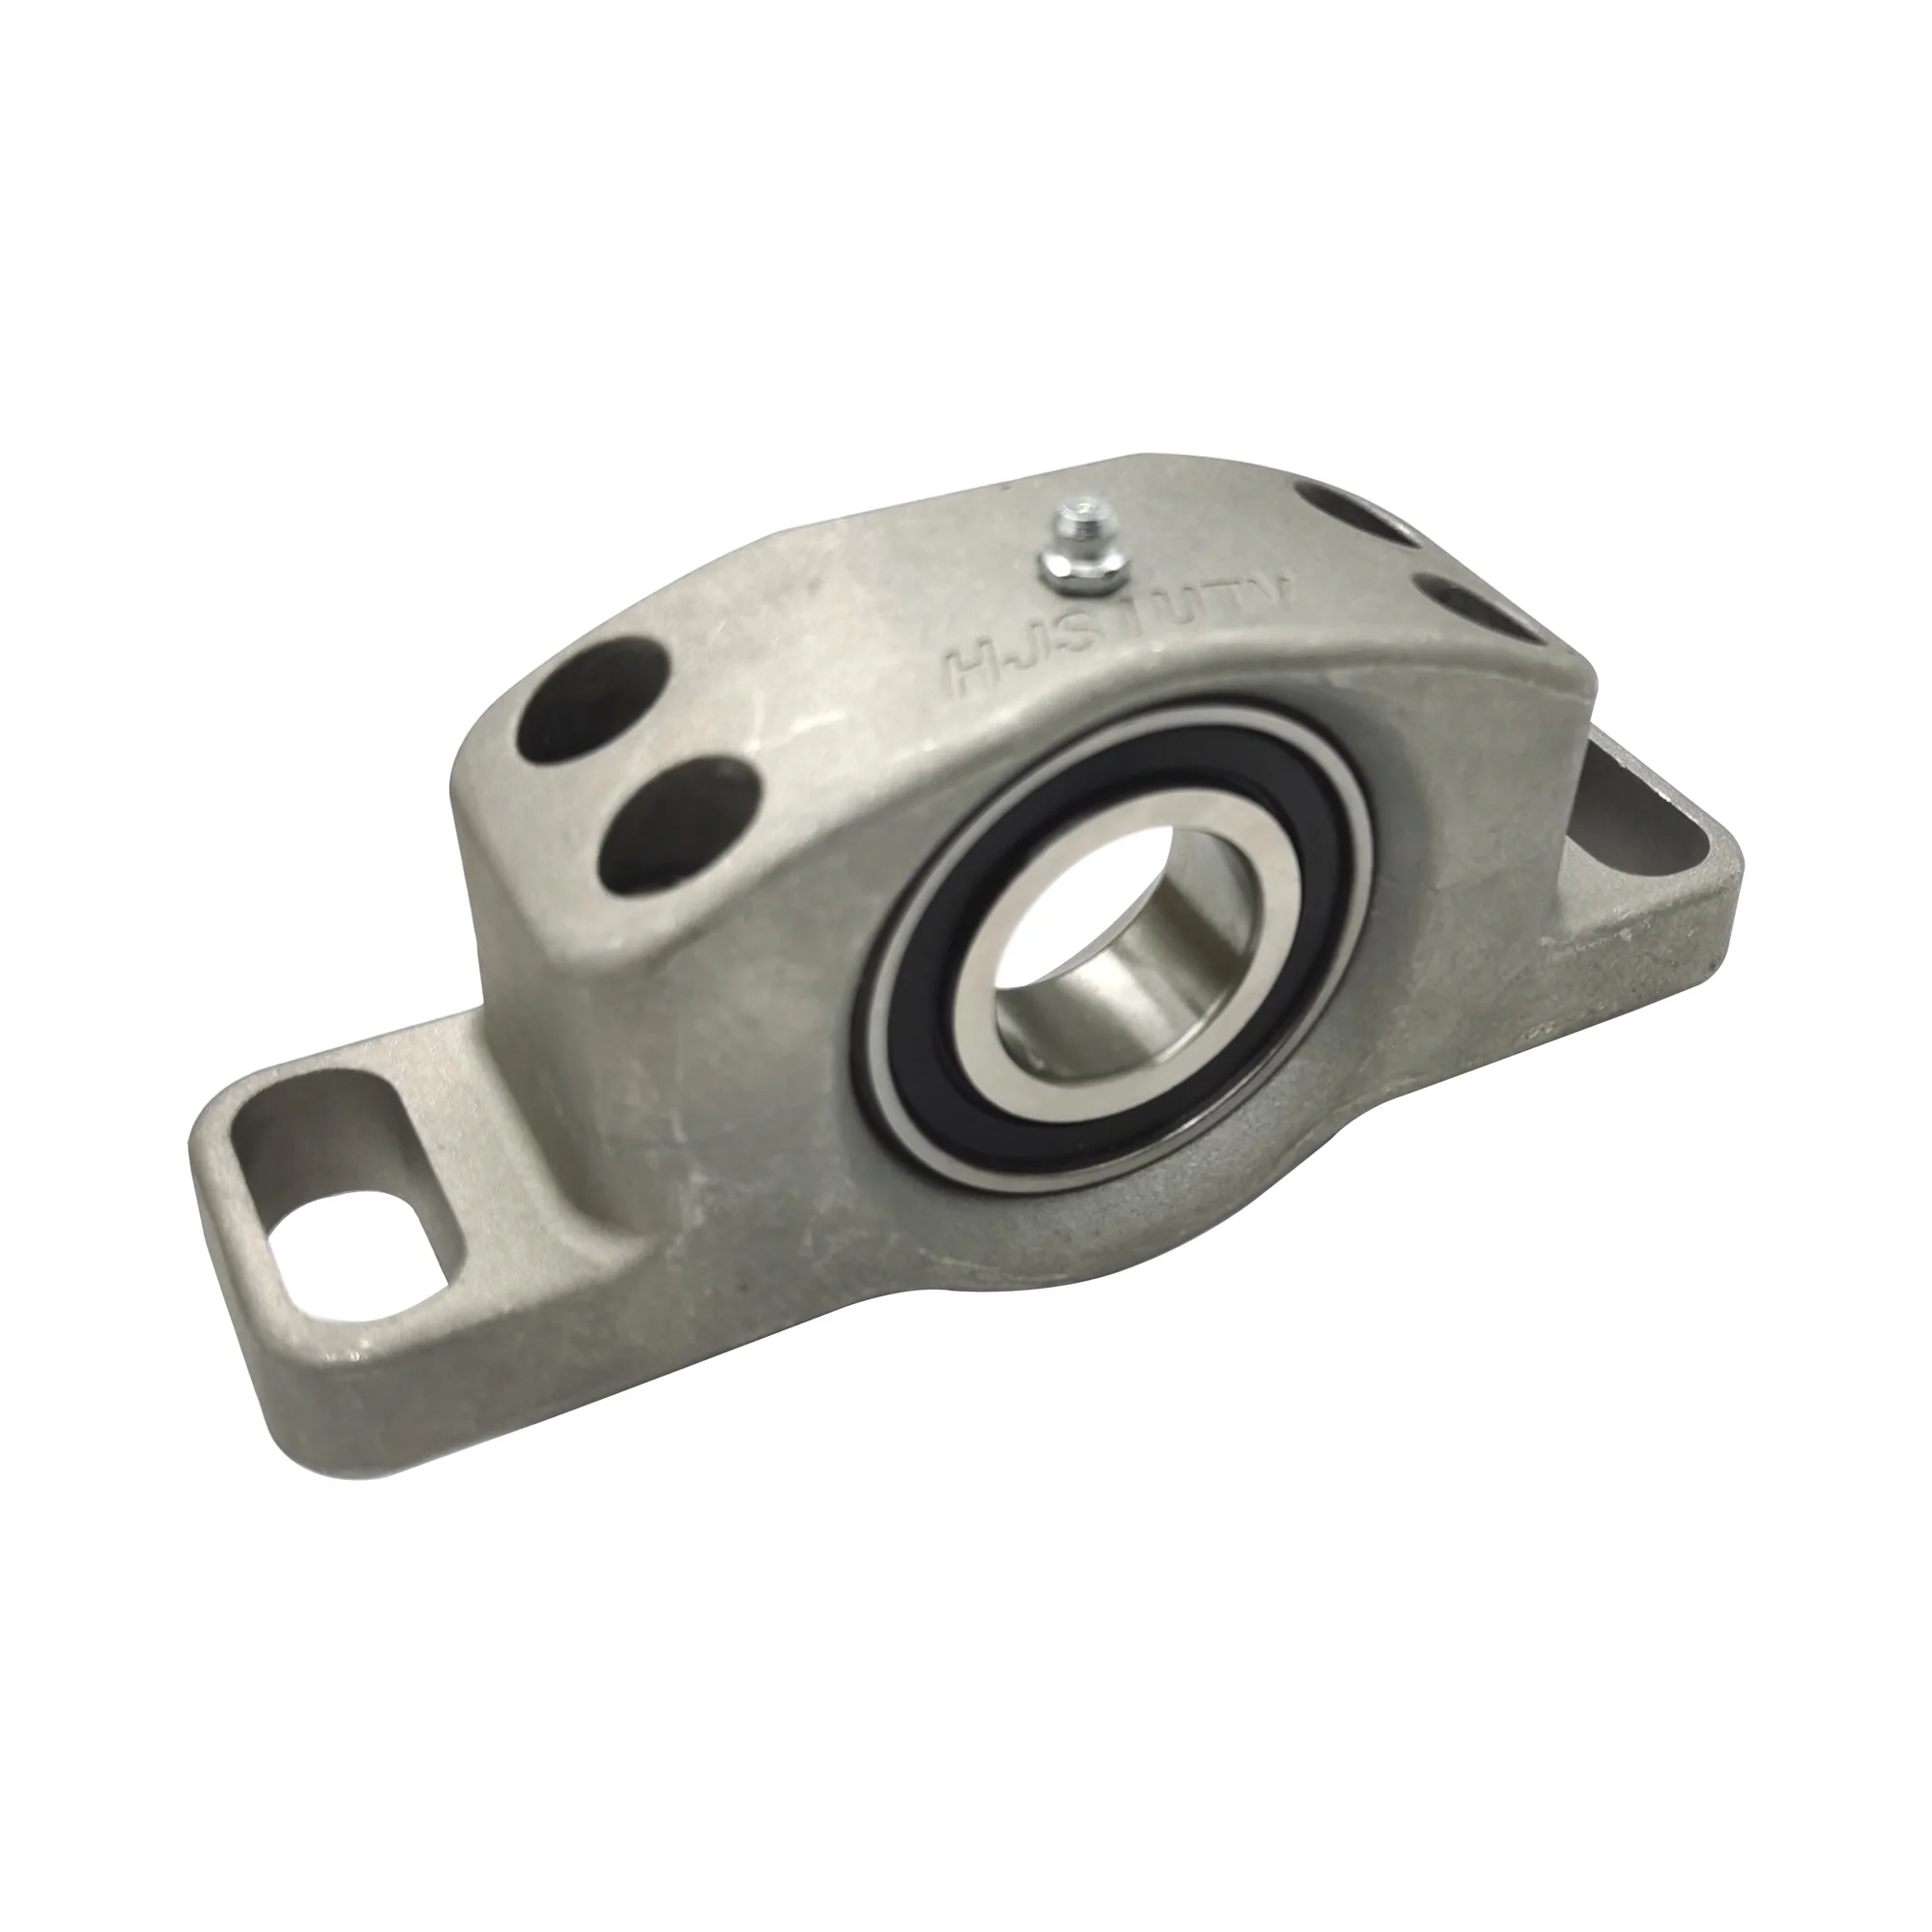 Driveshaft Carrier Bearing for Polaris RZR XP 4 1000 Polaris S 900 1000 2014-2020 Greaseable and Self Aligning, Only One